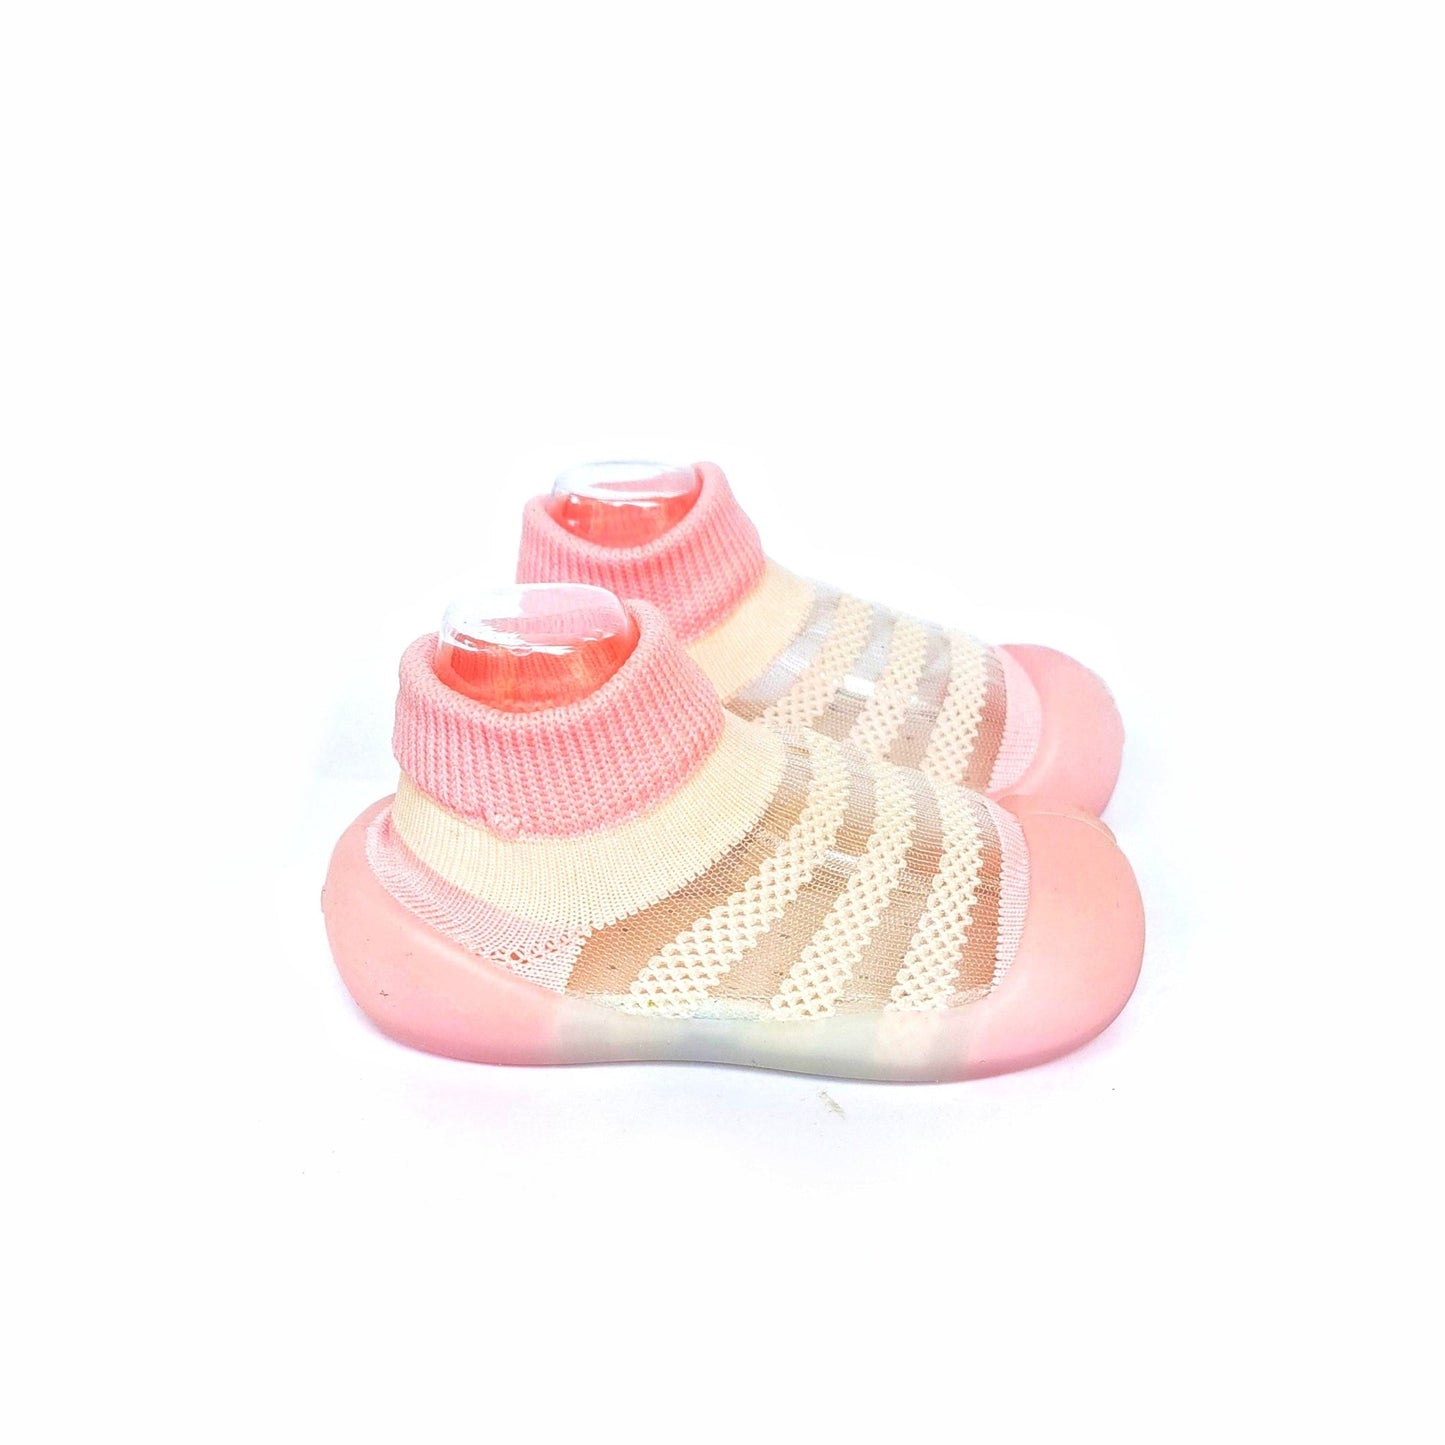 Golden Slipper by Bearba-Sock Shoes for Babies & Toddlers, Sizes- XS,S,M- Flexible Soles, Machine Washable- Pink/Green - Bearba